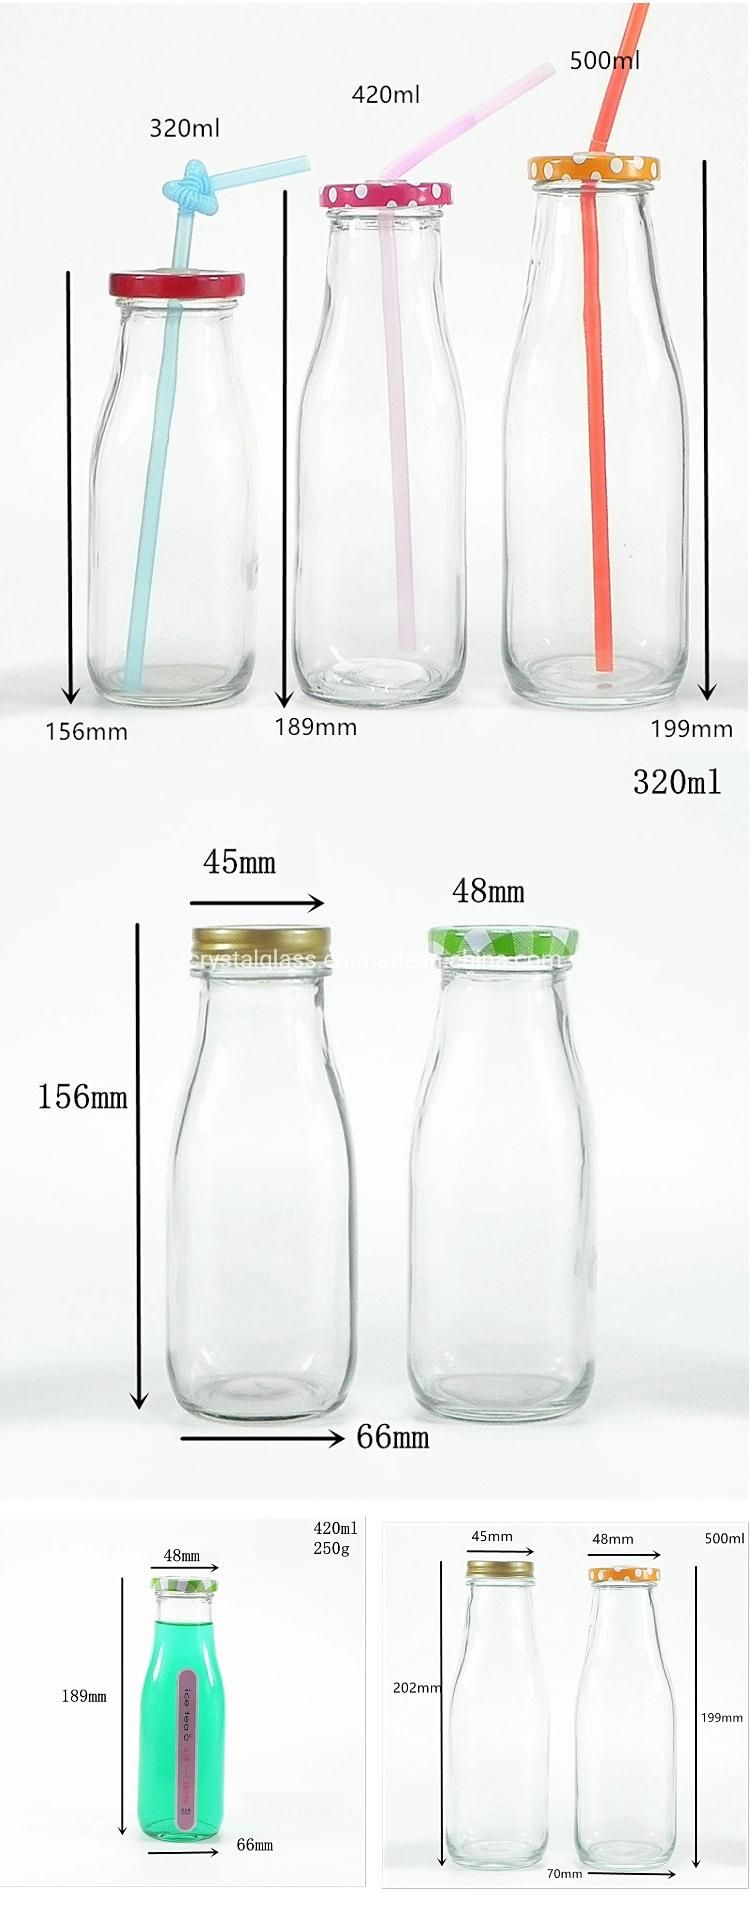 Glass Milk Bottles with Reusable Metal Twist Lids and Straws for Beverage and Drinkware